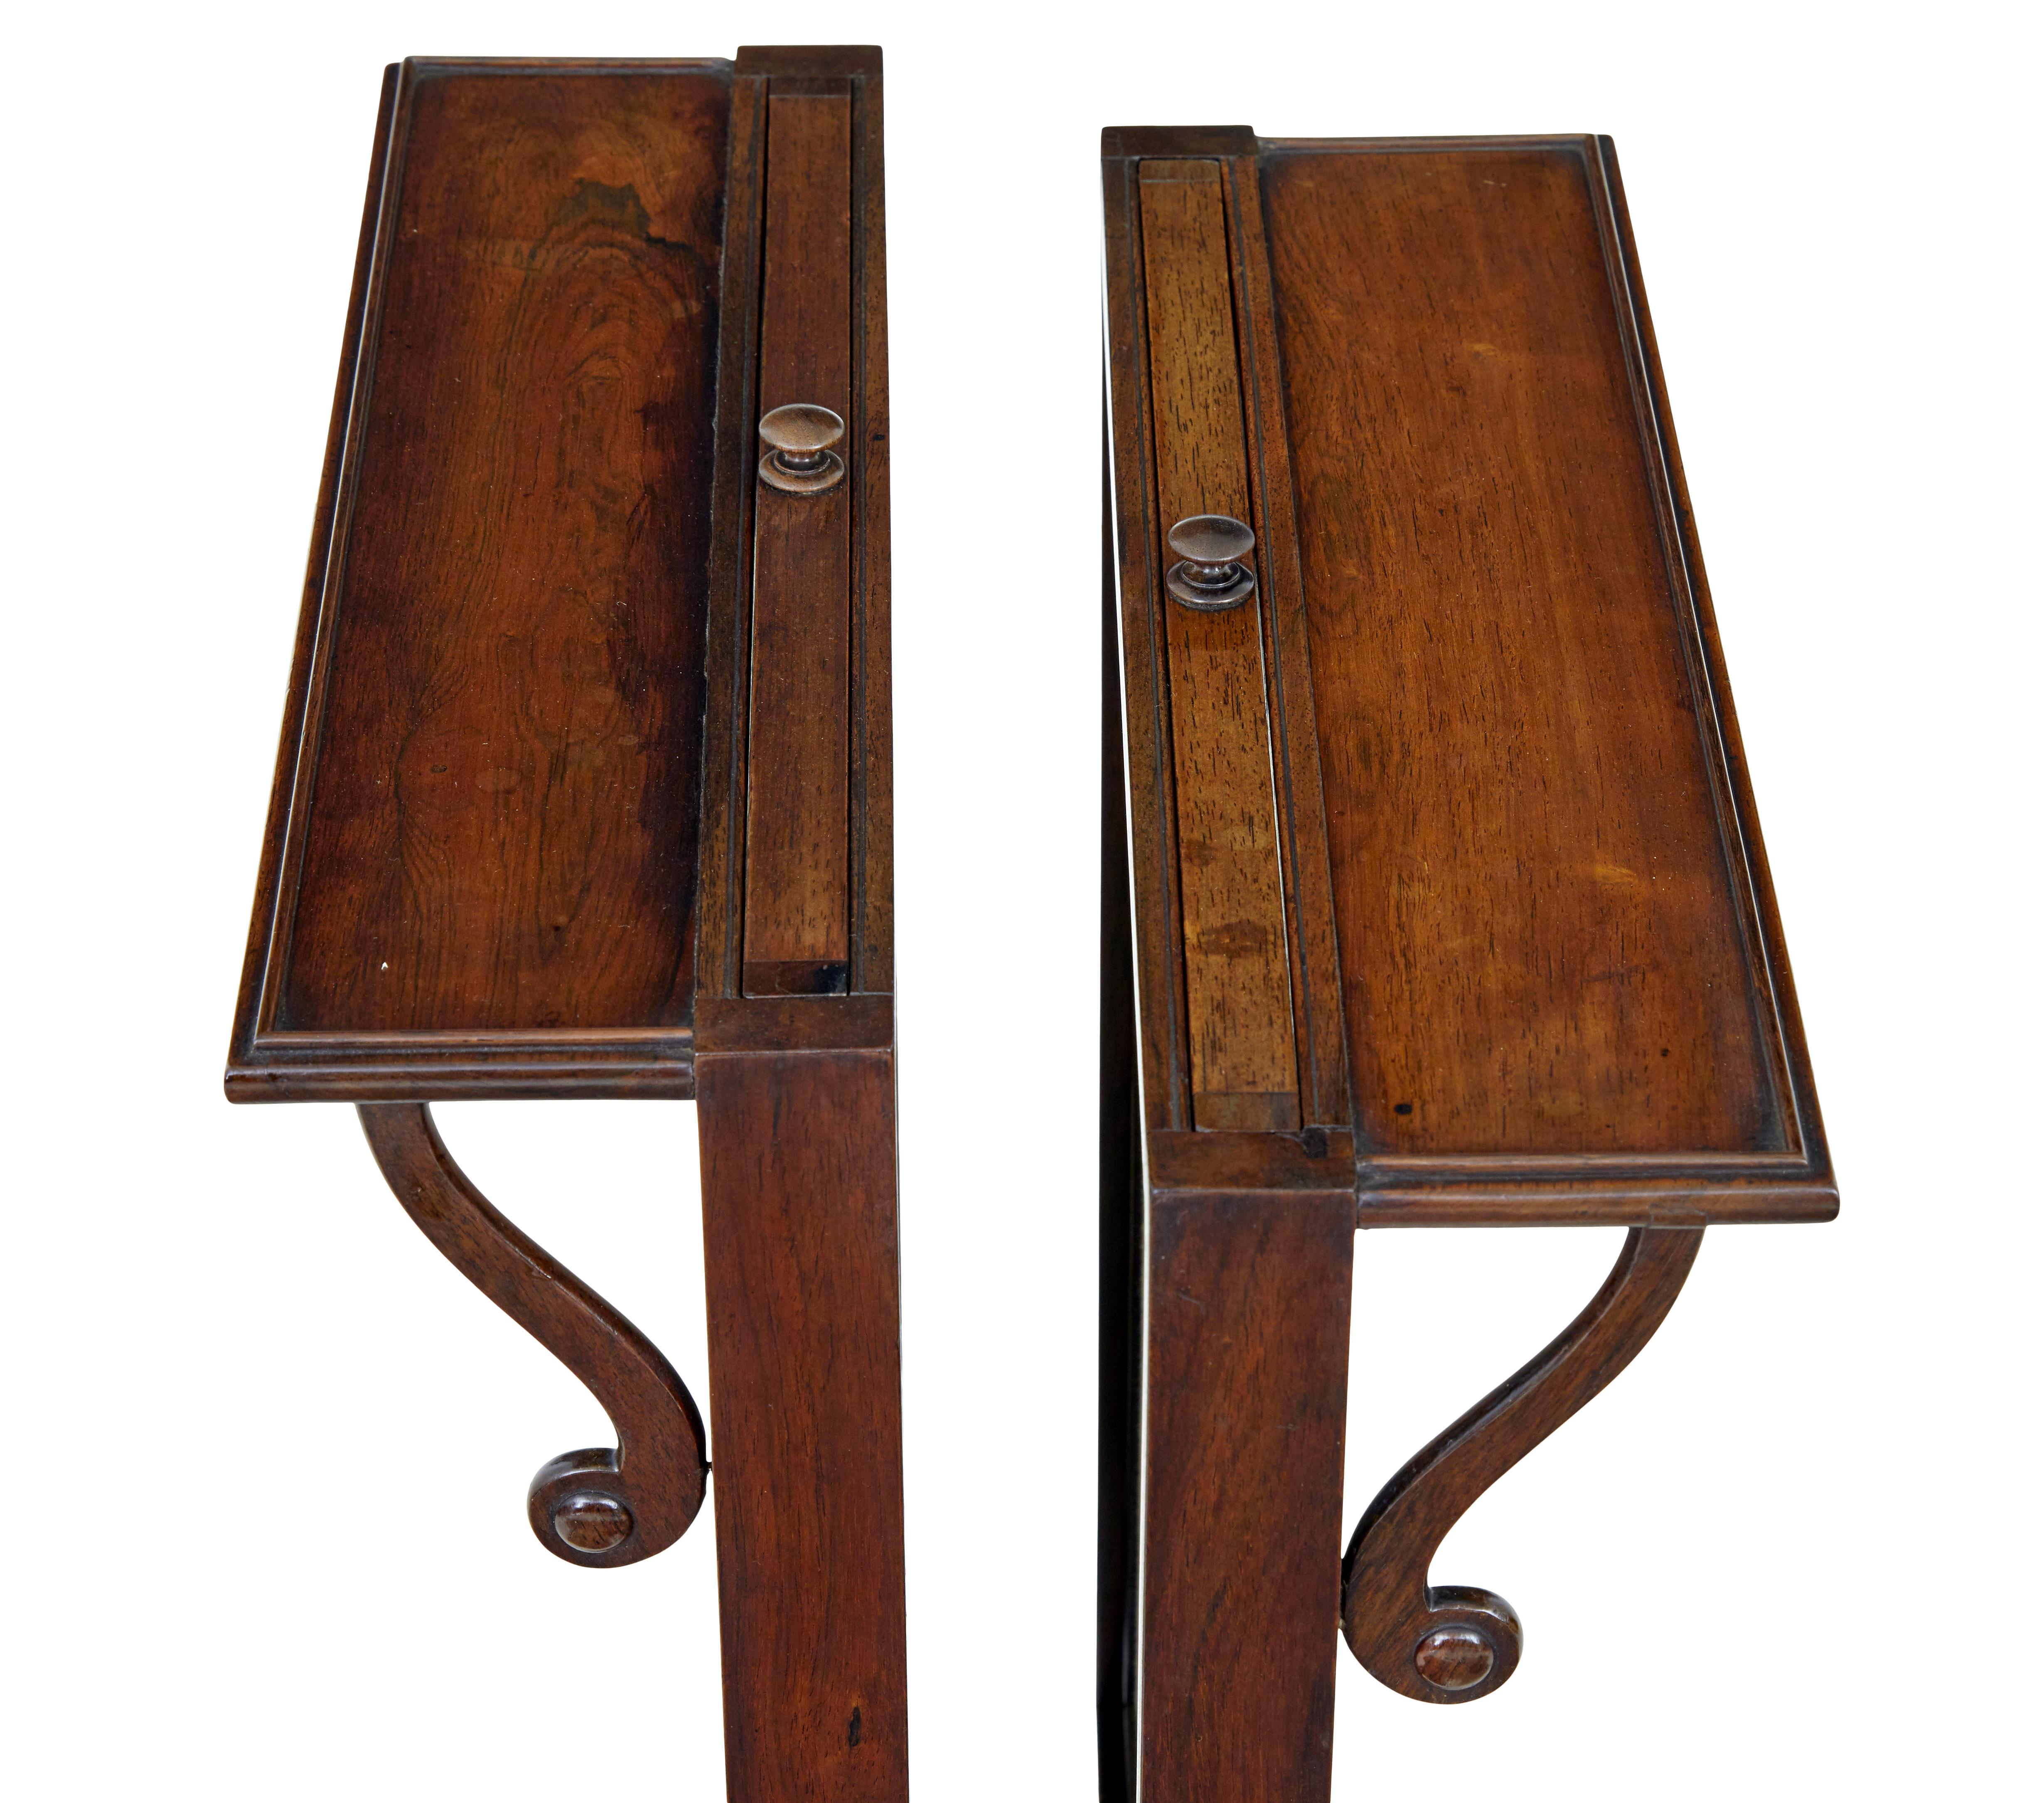 Fine pair of Regency palisander fire screens circa 1820.

Fine piece of early 19th century design. Screens hold up with friction and are adjustable. Striking palisander  with good colour and patina.  Rare to find these in a pair and the ideal piece